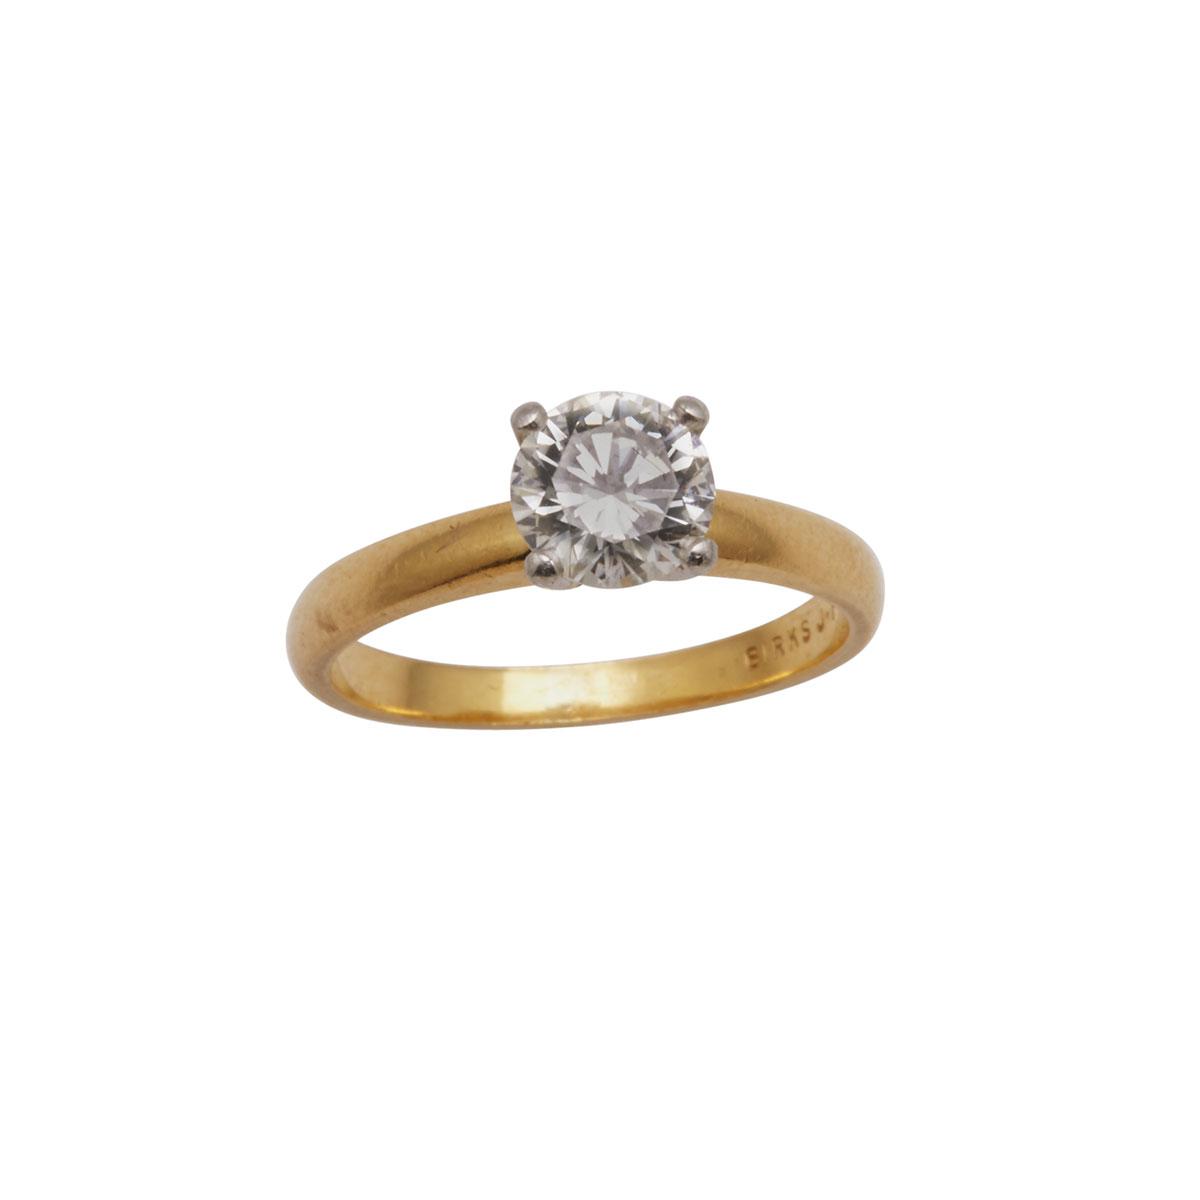 Birk’s 18k Yellow Gold And Platinum Ring